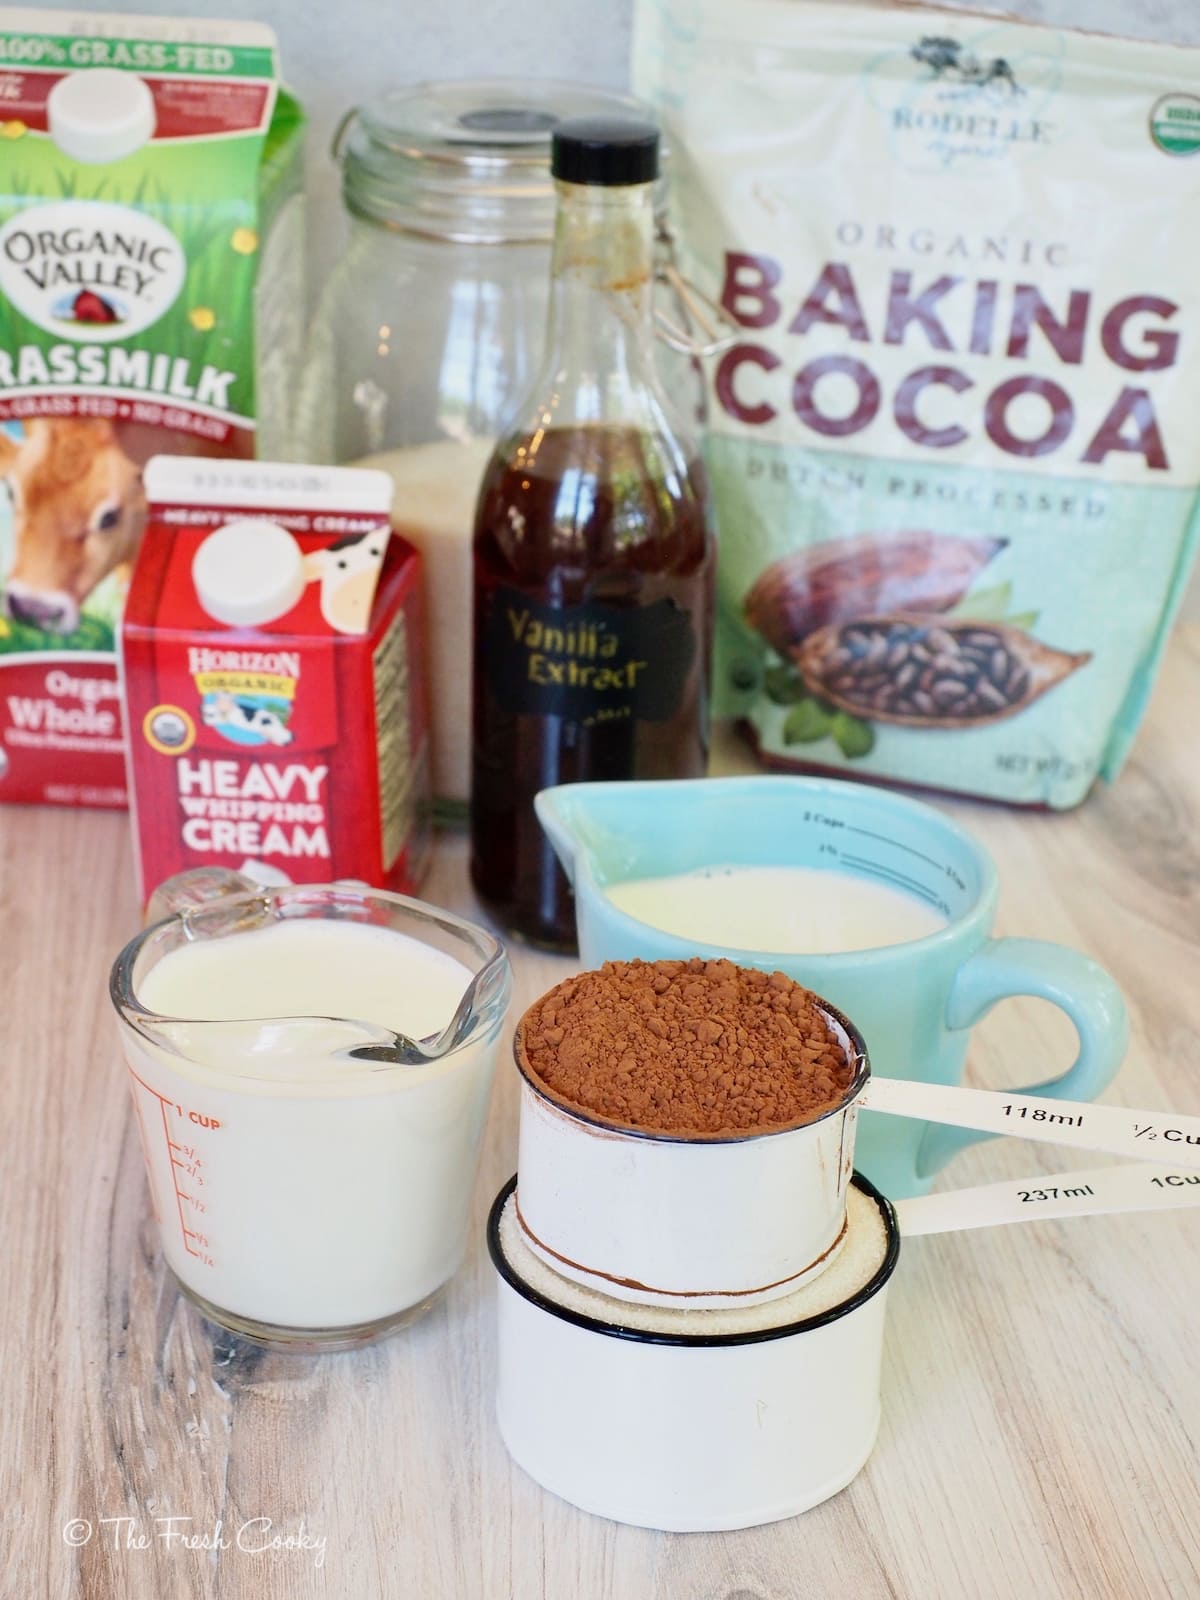 Ingredients on wooden board for chocolate ice cream. Left to right. Grassfed whole milk, all natural sugar, Rodelle Baking Cocoa, Vanilla Extract, Heavy Cream and each item measuring in a measuring cup. 